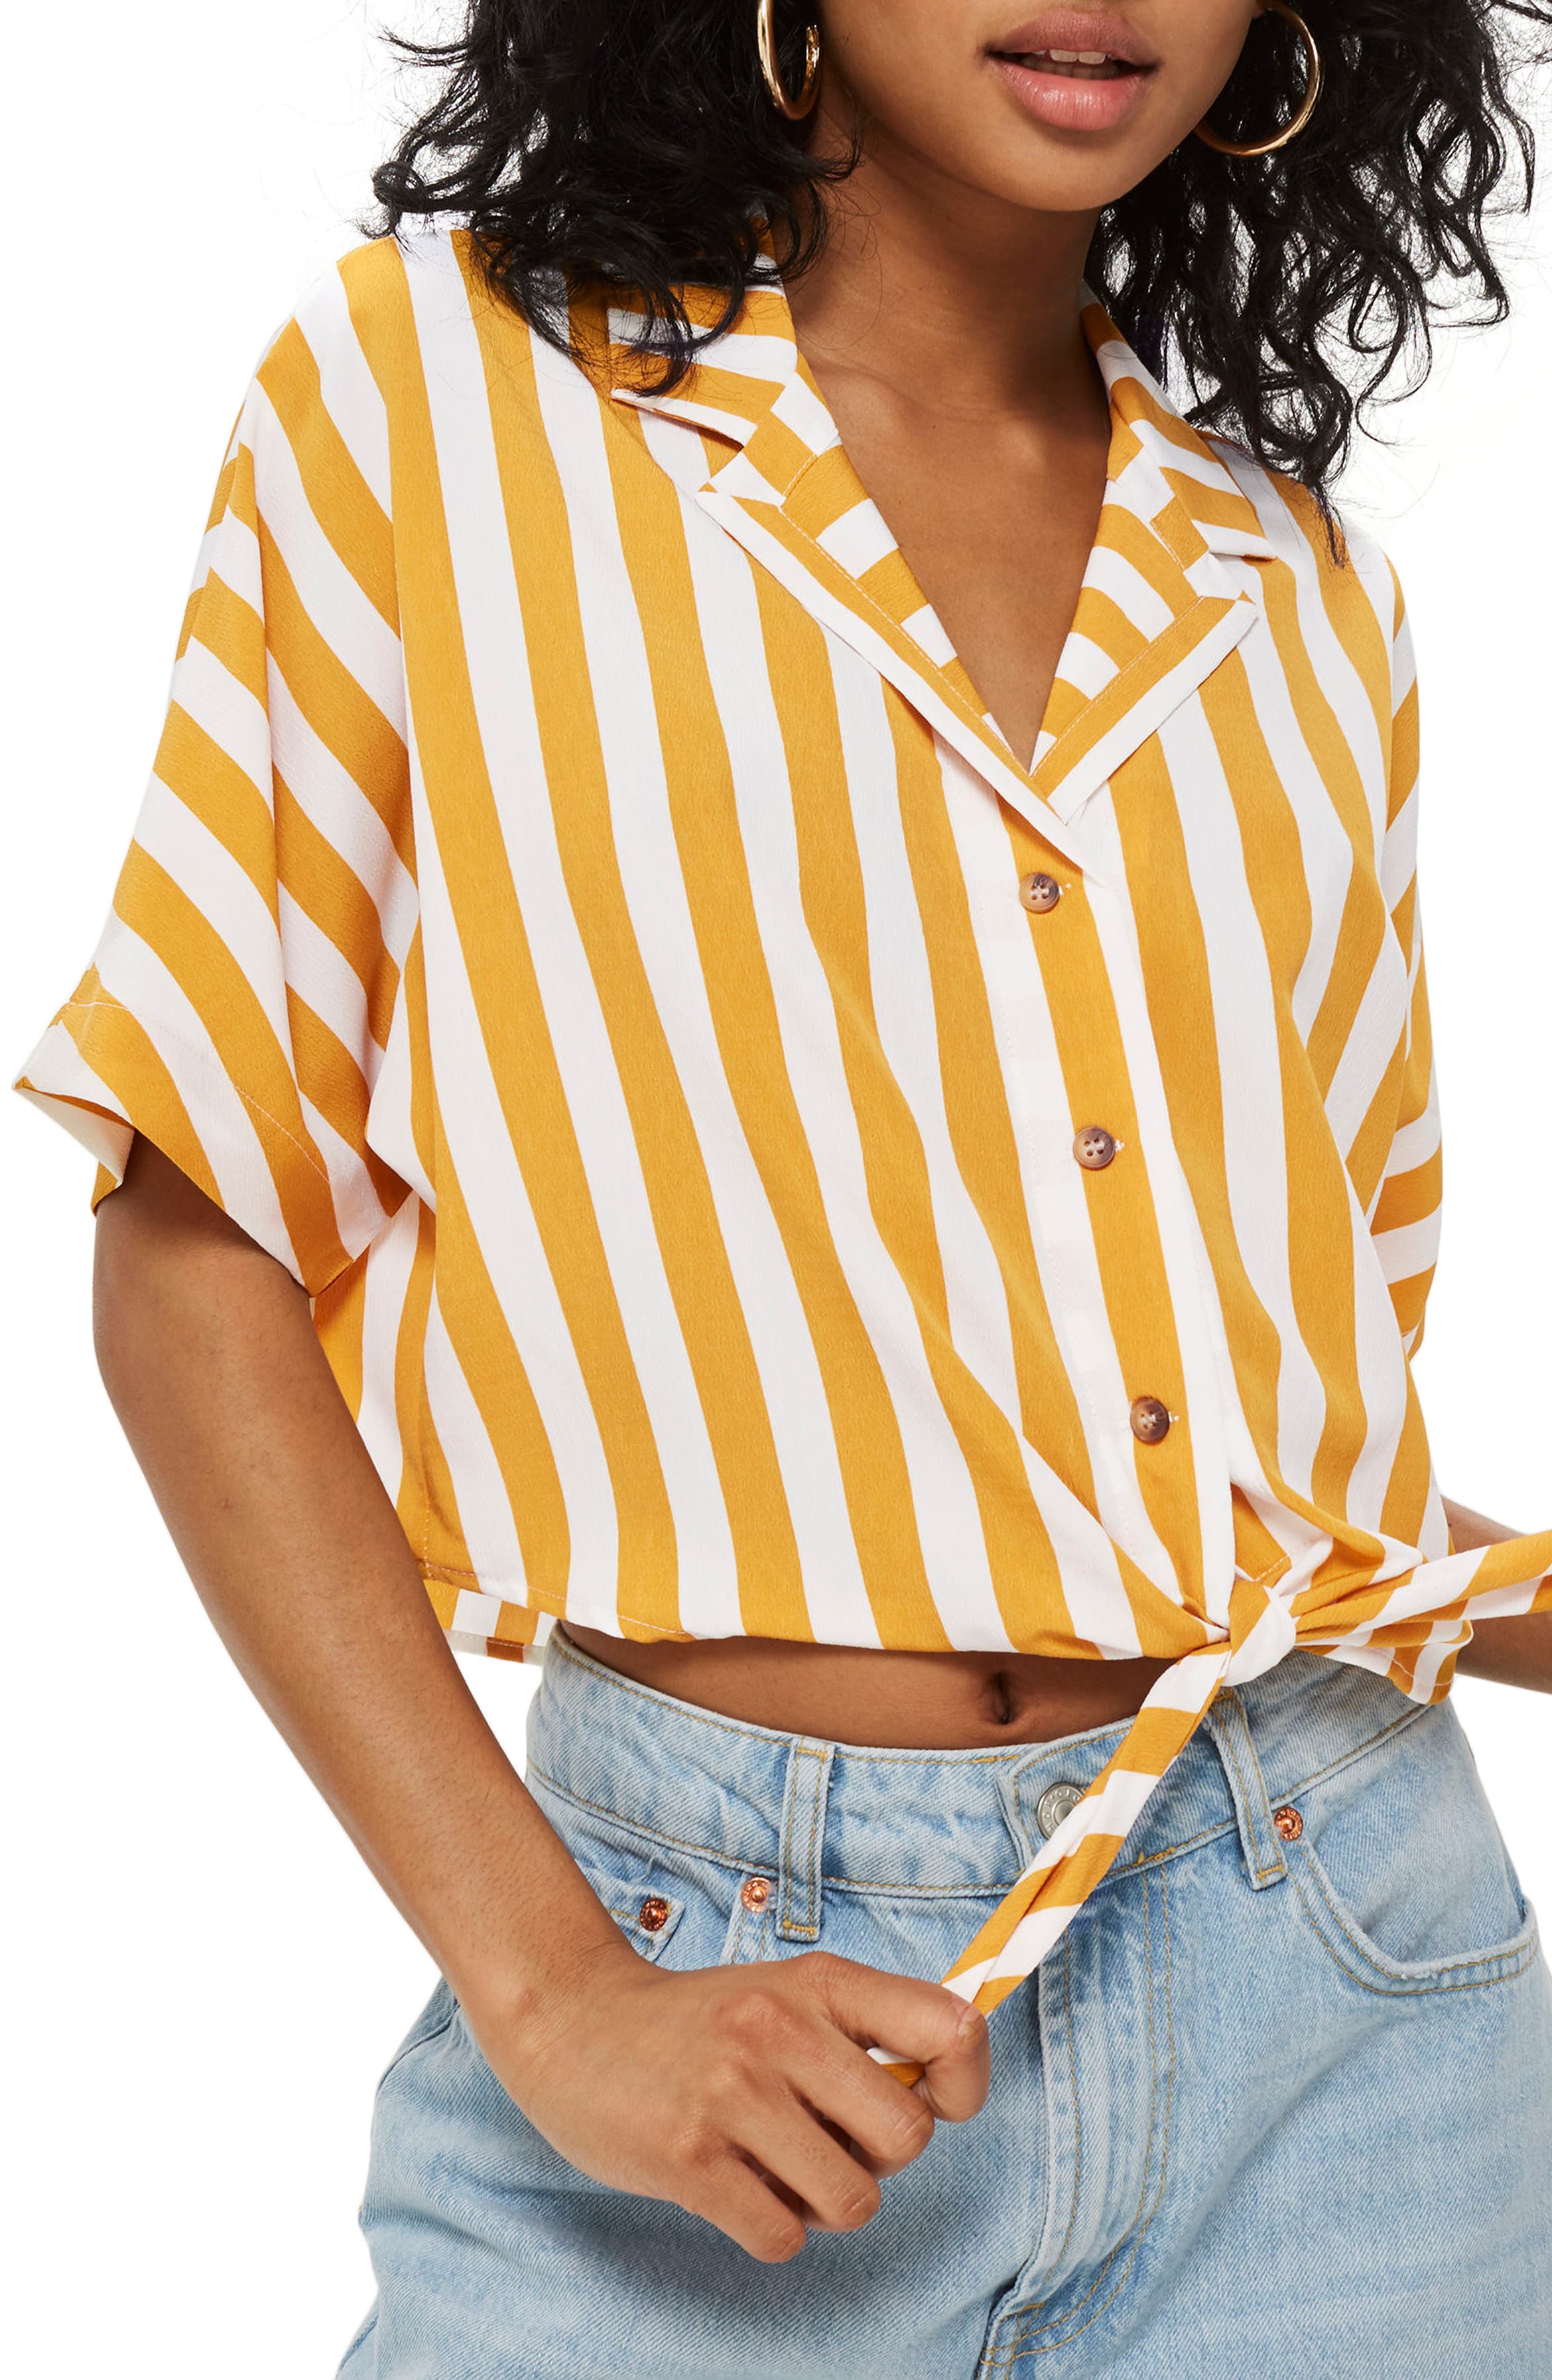 Topshop Stripe Tie Front Cropped Collar Shirt | Nordstrom